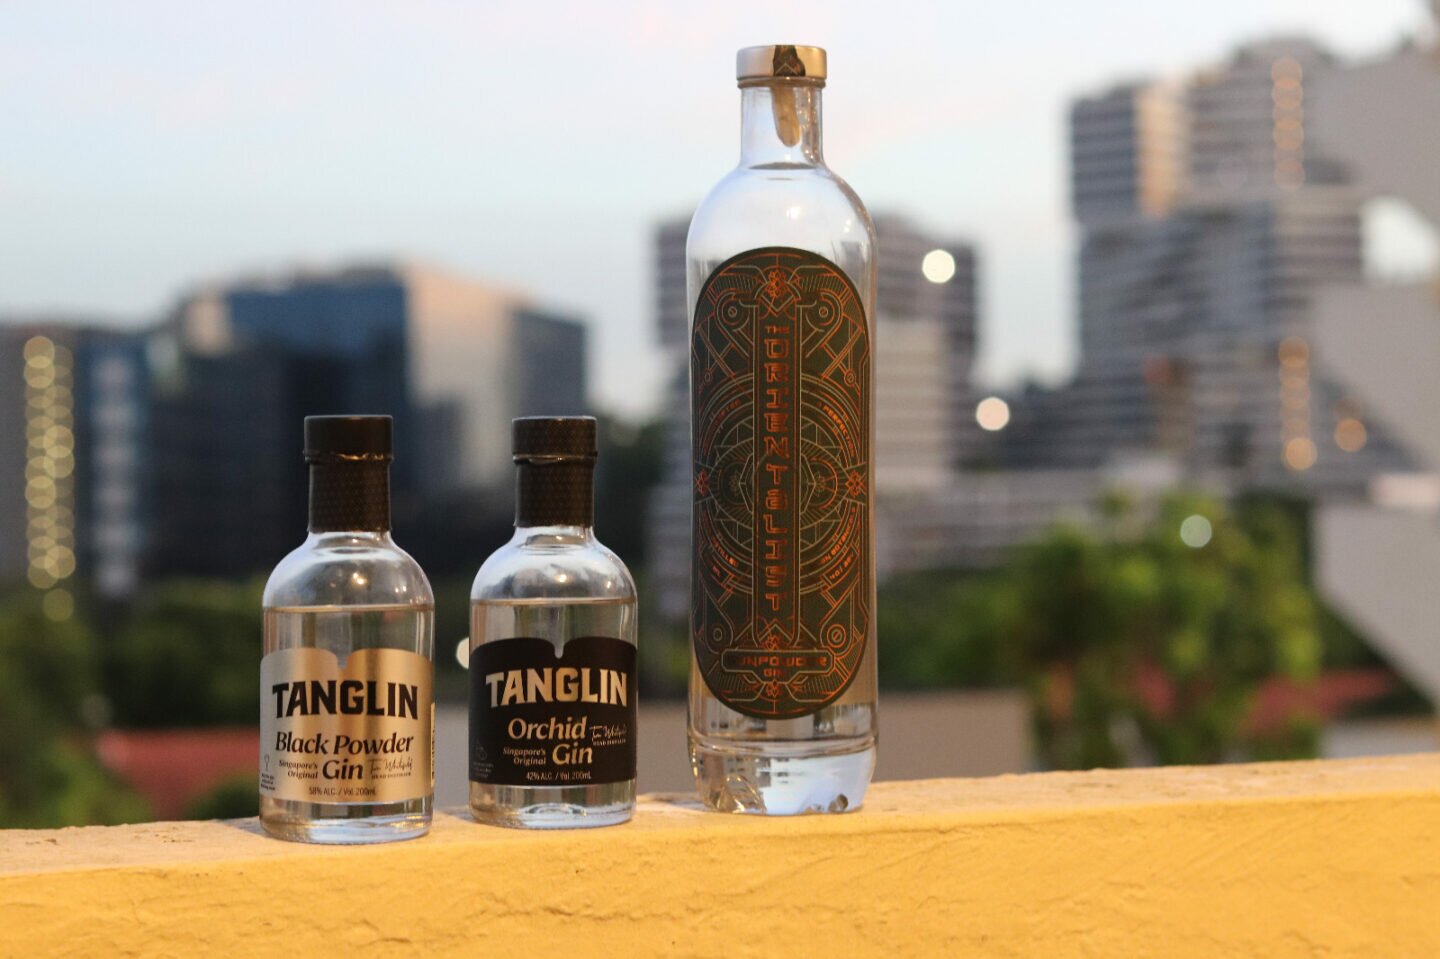 Singapore Gin Review: We Tried Gin From 5 Local Distilleries So You Don’t Have To